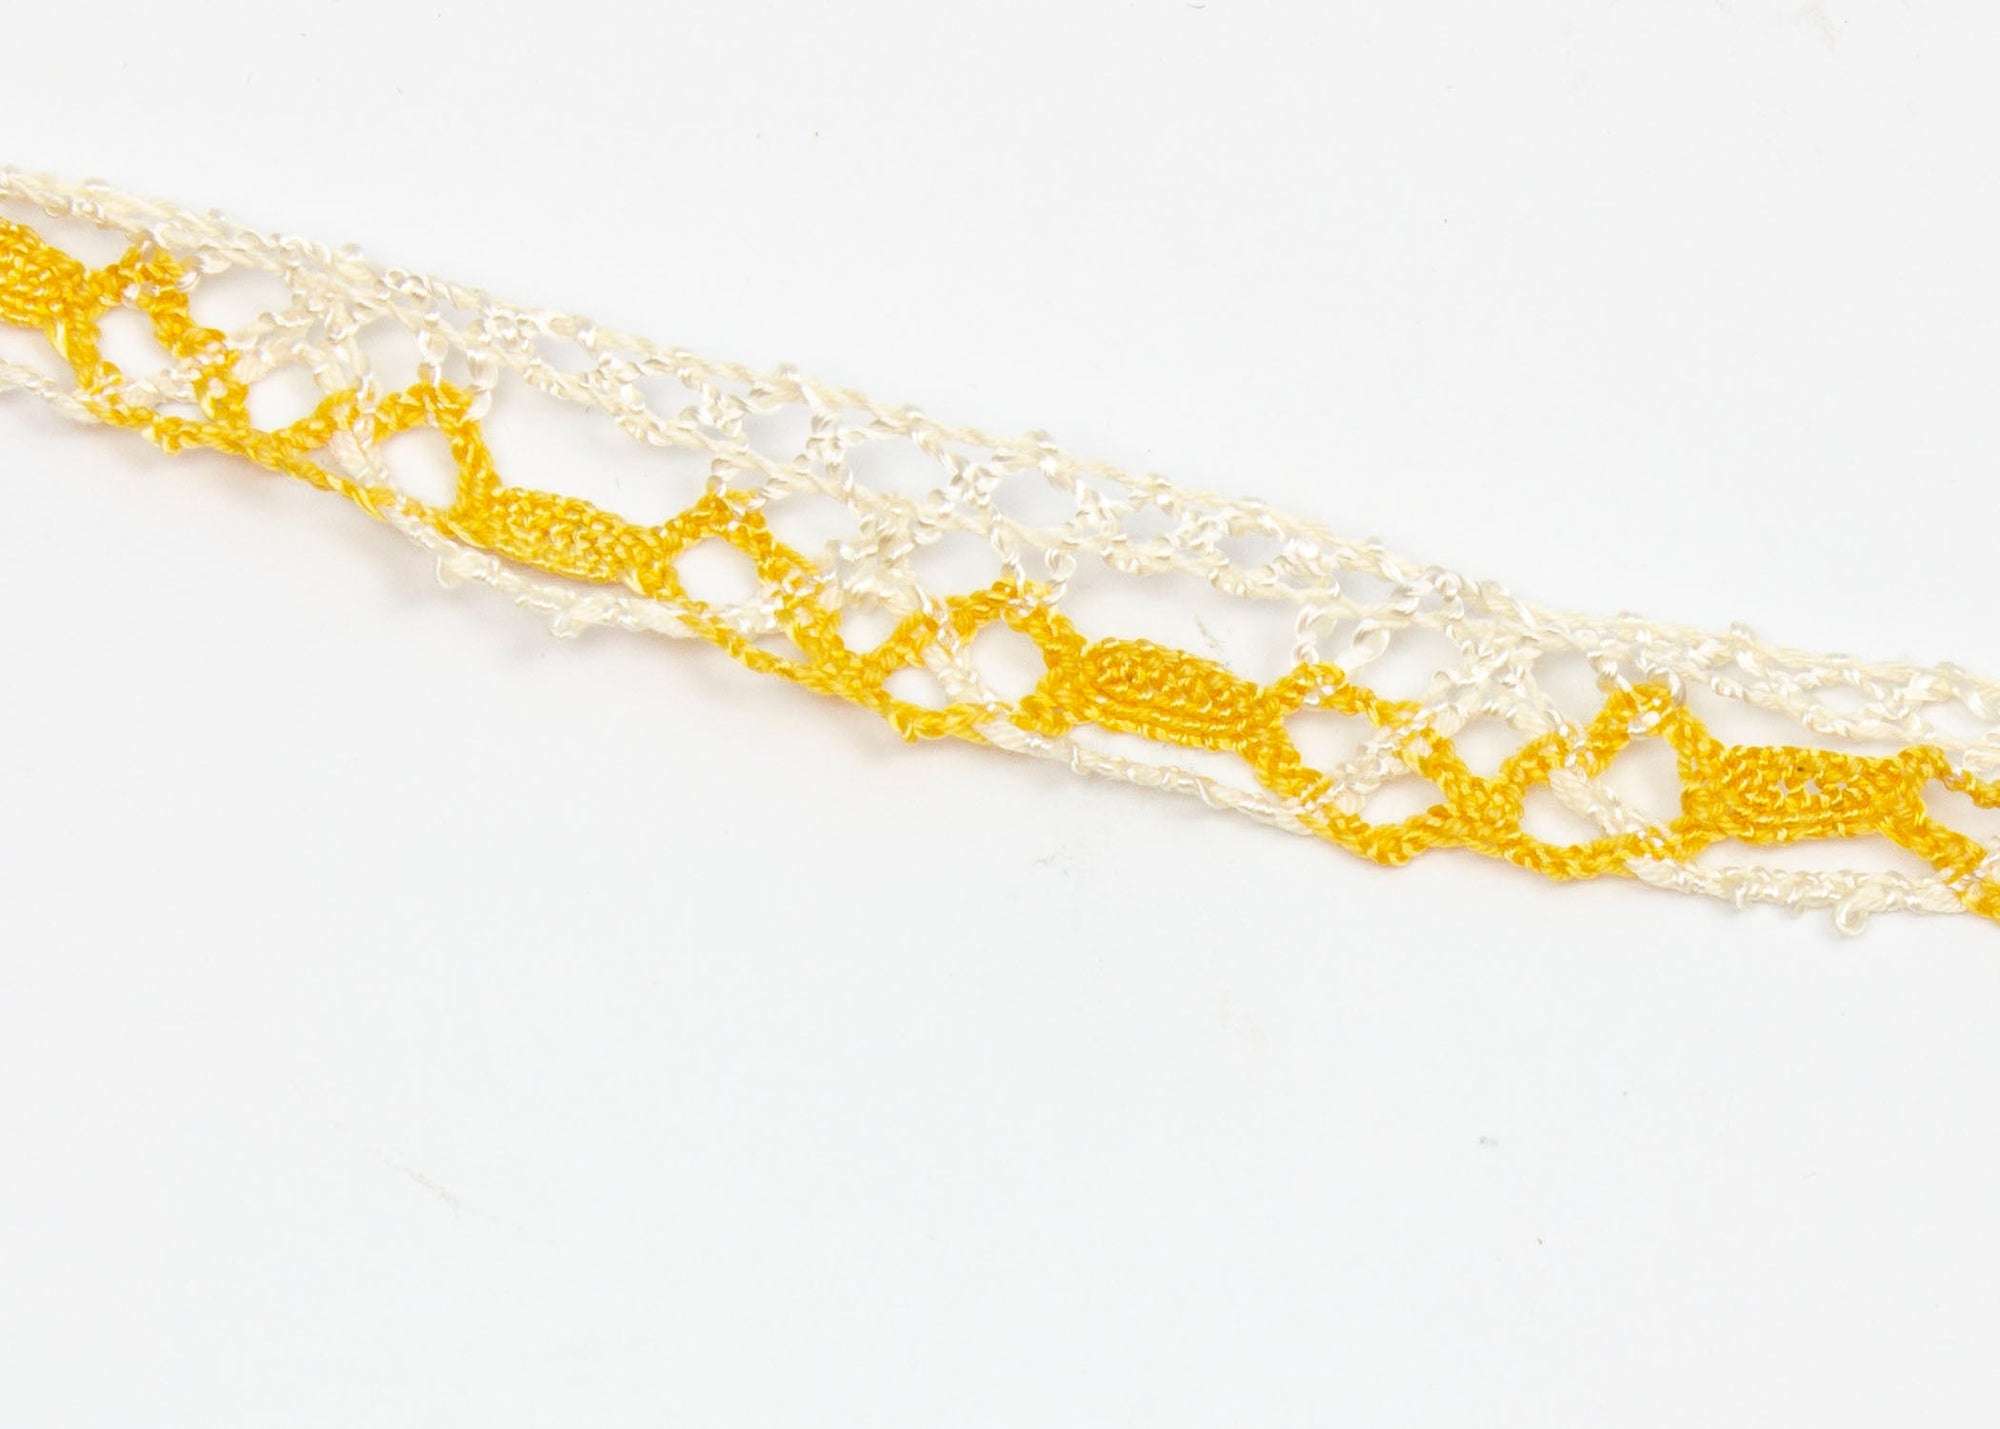 Vintage Lace 1960's Cotton Crochet Yellow and White Trim, 24mm Sold by the Yard